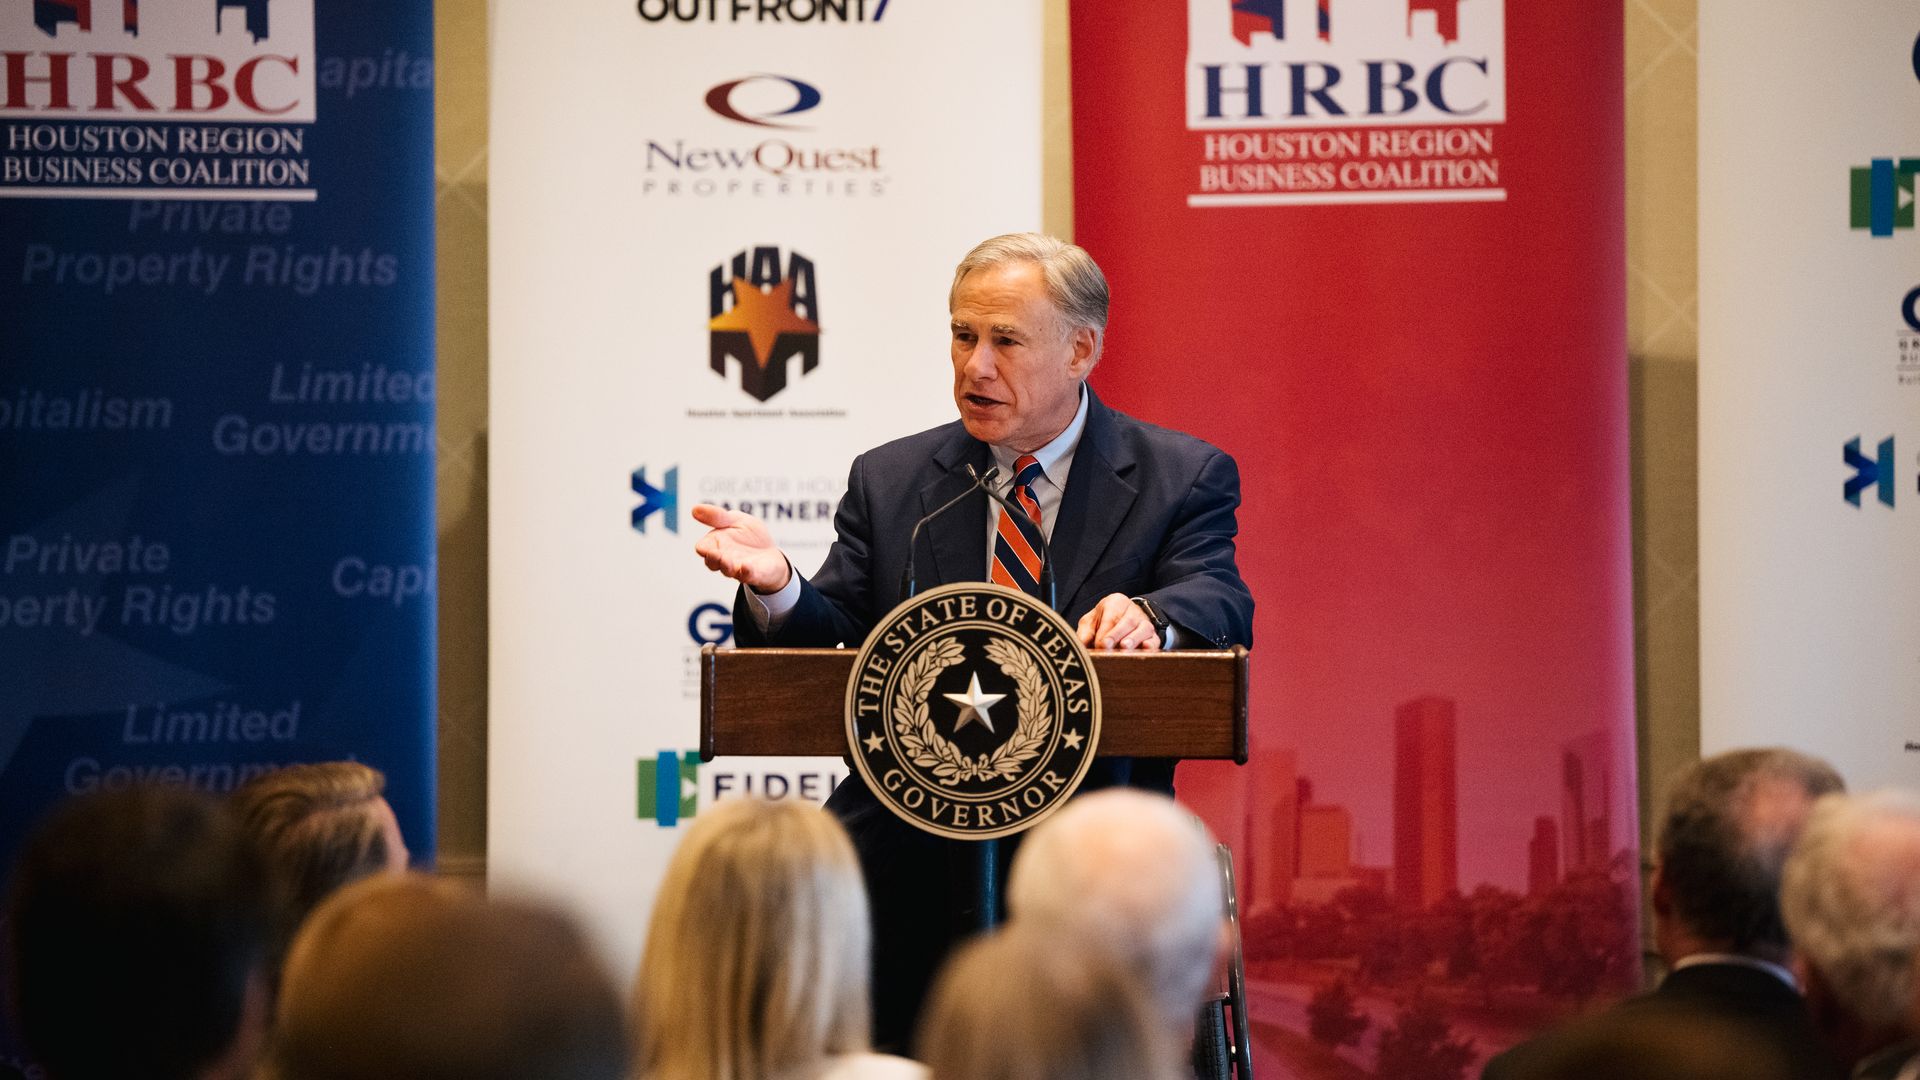 Photo of Greg Abbott speaking from a podium to a crowd of people